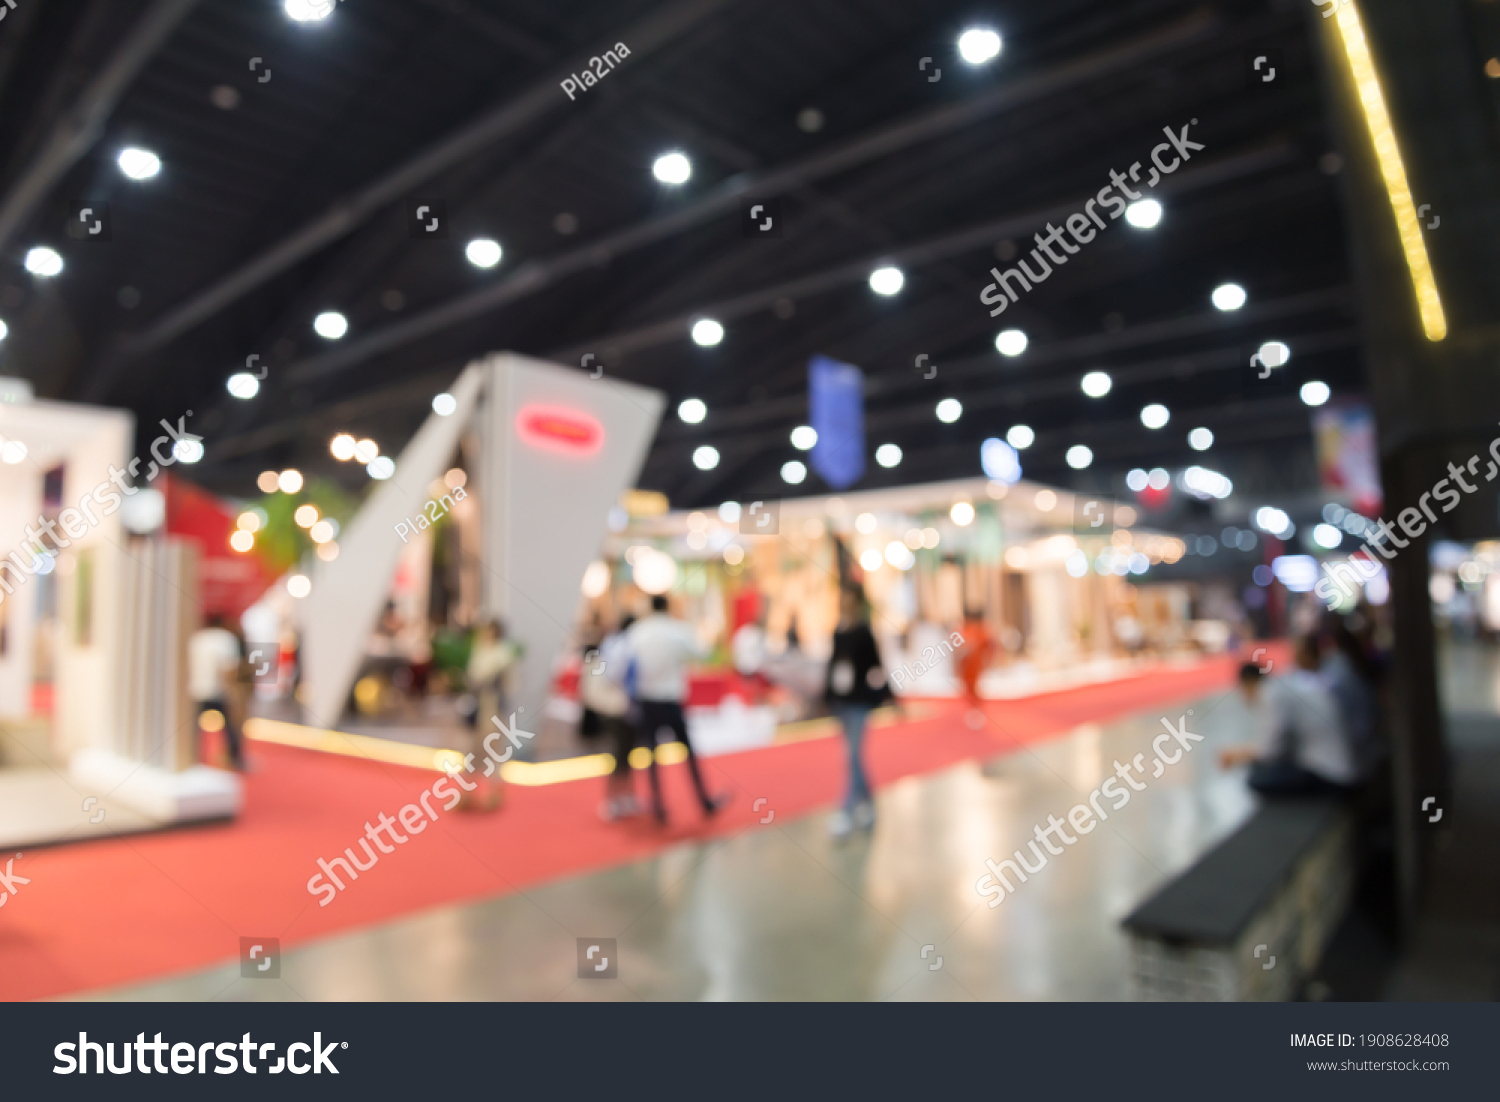 Abstract blur people in exhibition hall event trade show expo background. Large international exhibition, convention center, business marketing and event fair organizer concept. #1908628408